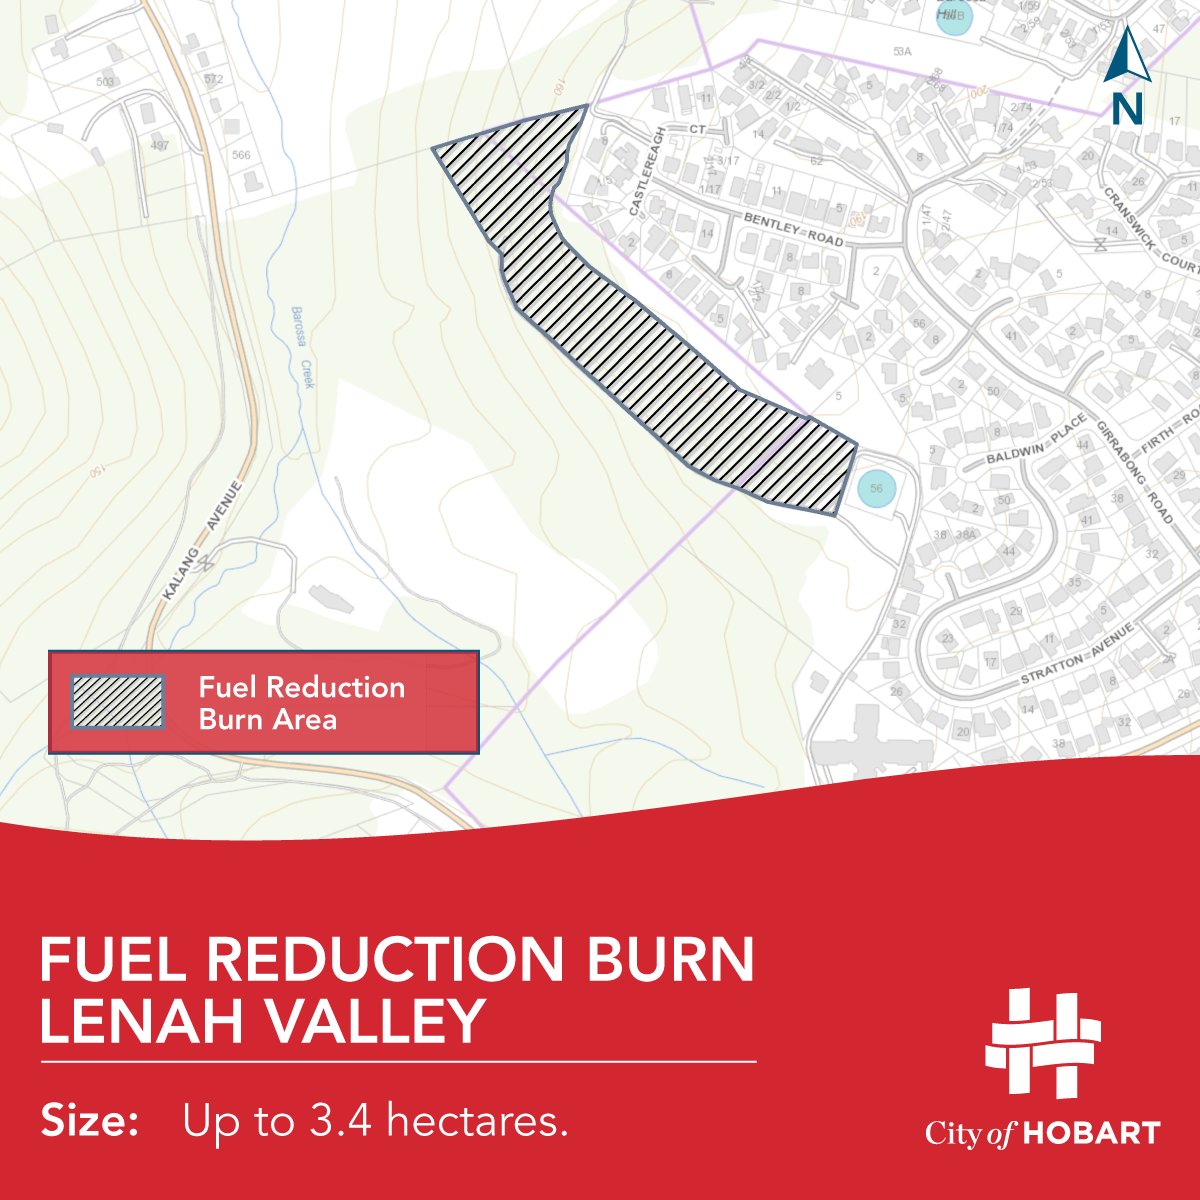 We plan to carry out a fuel reduction burn in Lenah Valley tomorrow, Thursday 19 October. Some smoke may be produced, but we will make every effort to minimise the impact on nearby areas. For more information about this burn read our Burn Alert: bit.ly/Burn-Alert-Len…